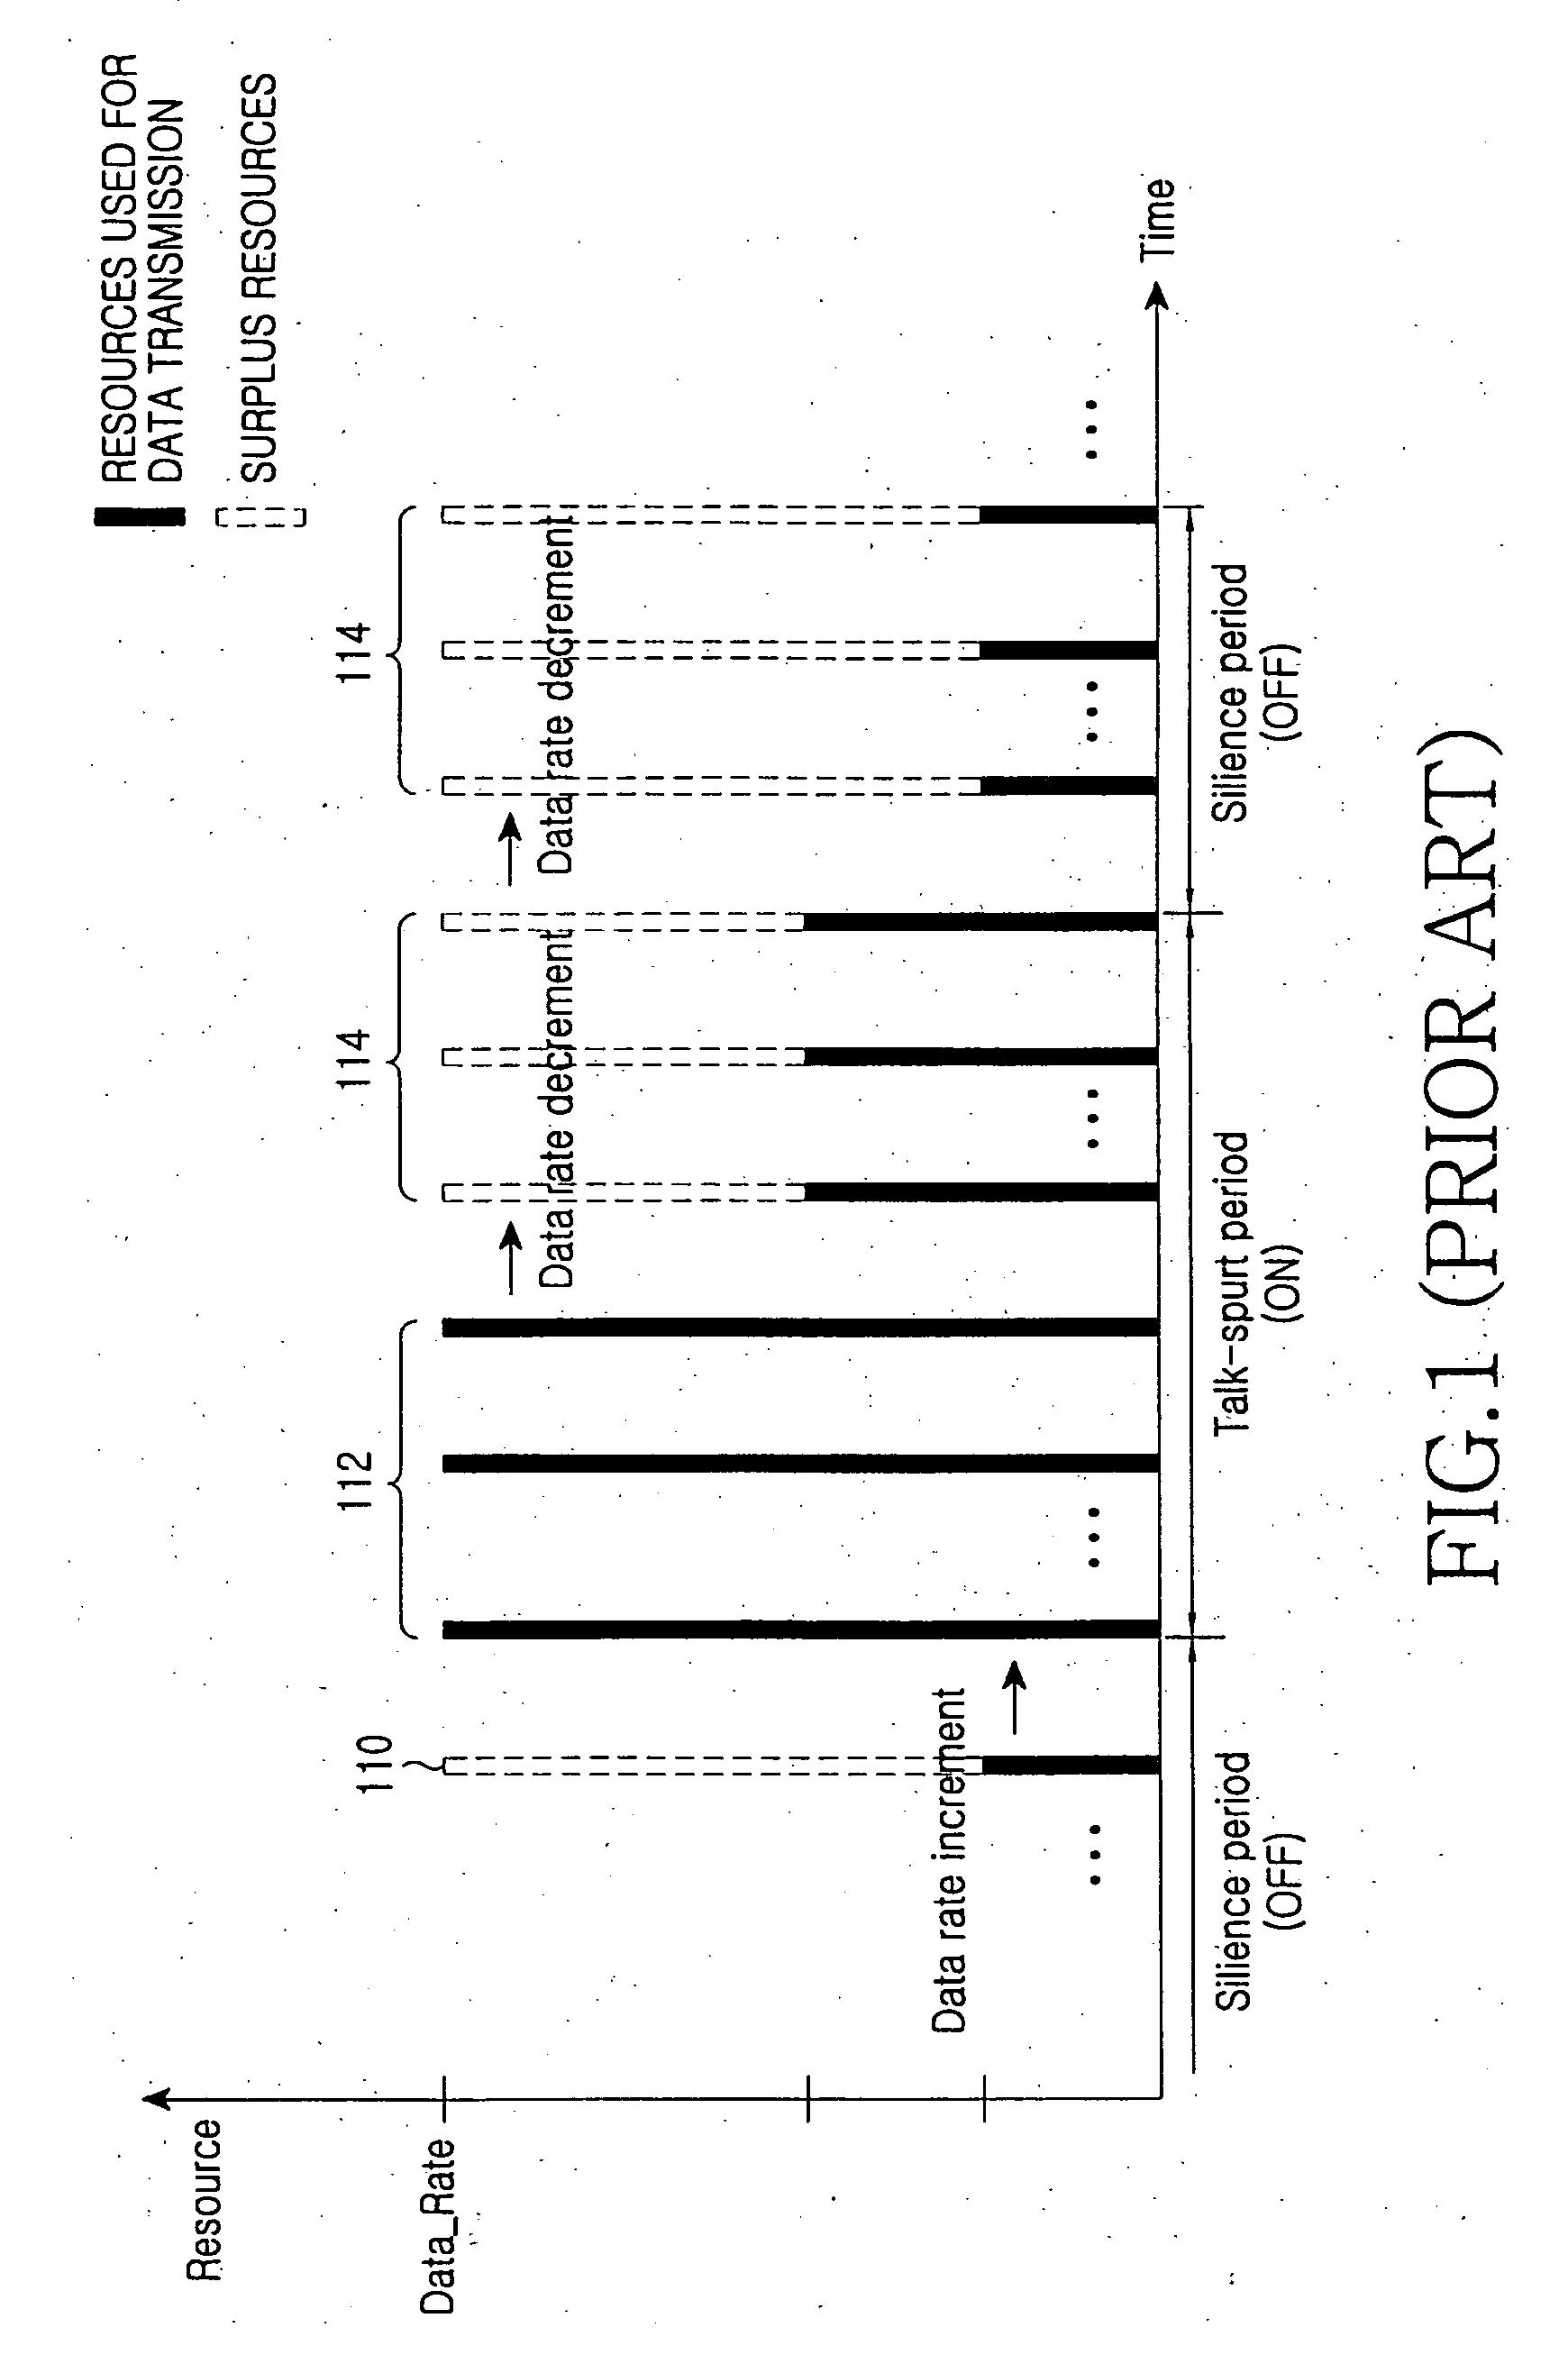 Method for requesting and allocating uplink resources in a wireless communication system for supporting a real-time service